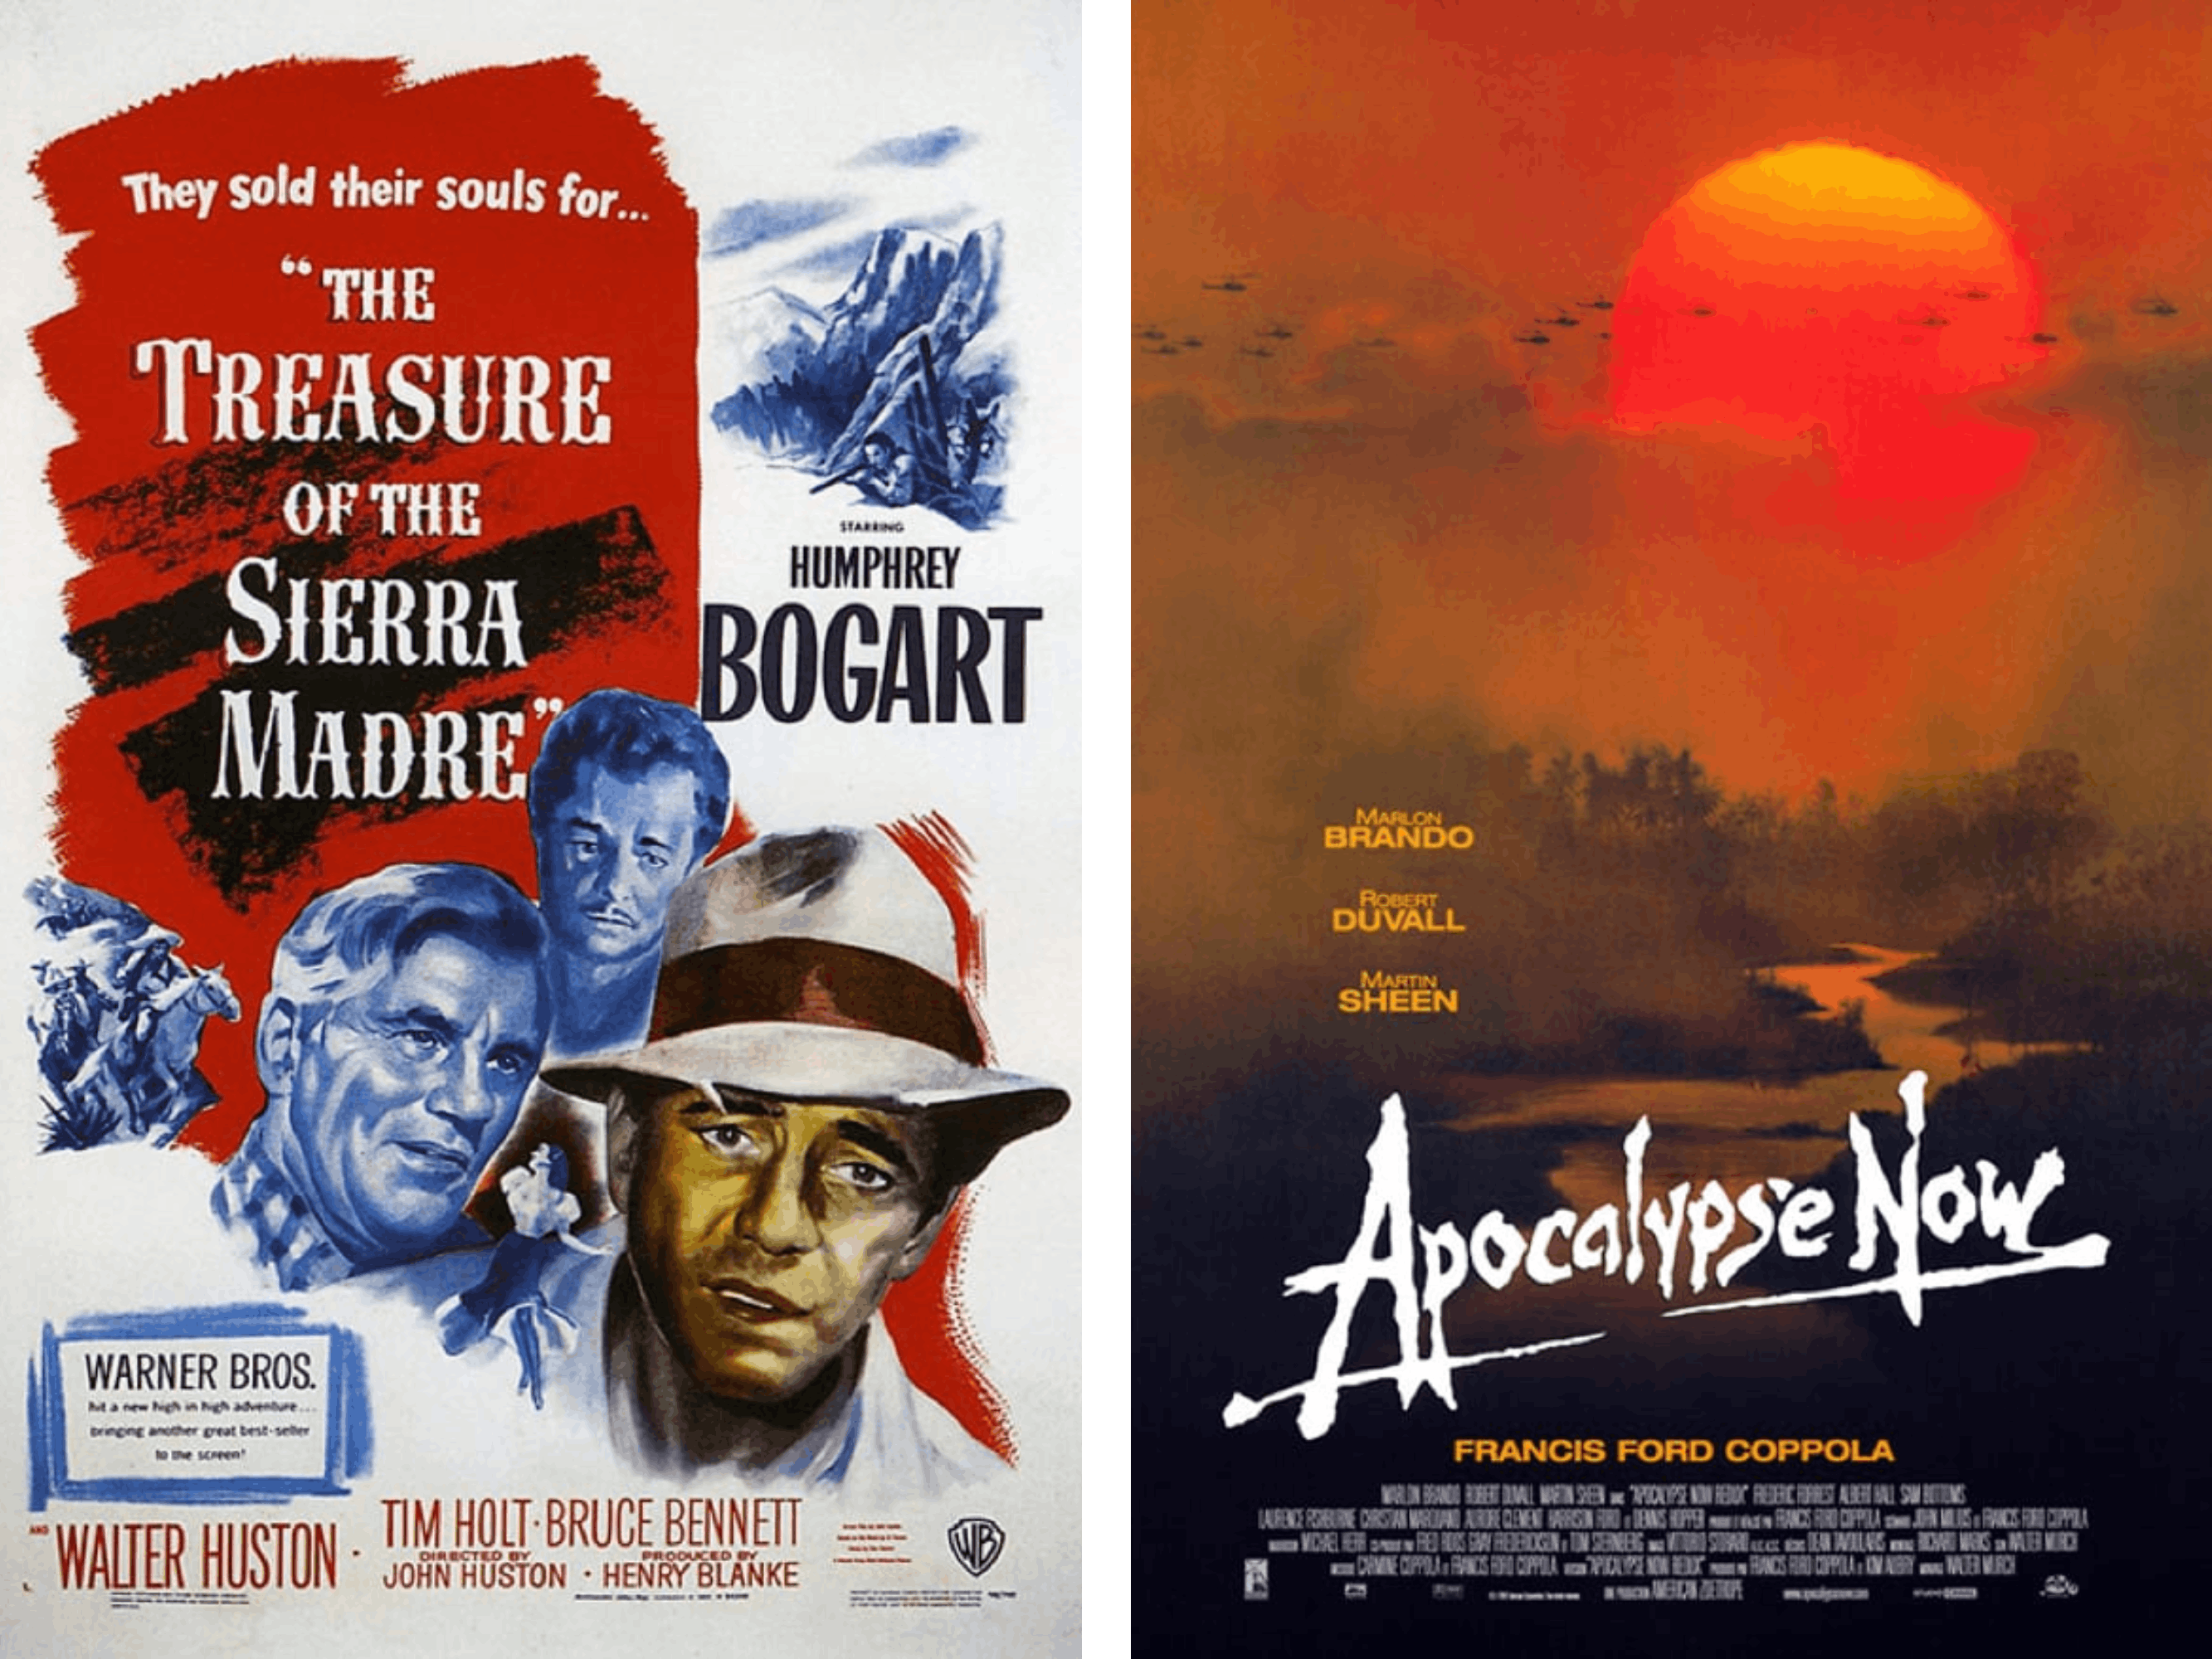 Film posters for The Treasure of the Sierra Madre and Apocalypse Now